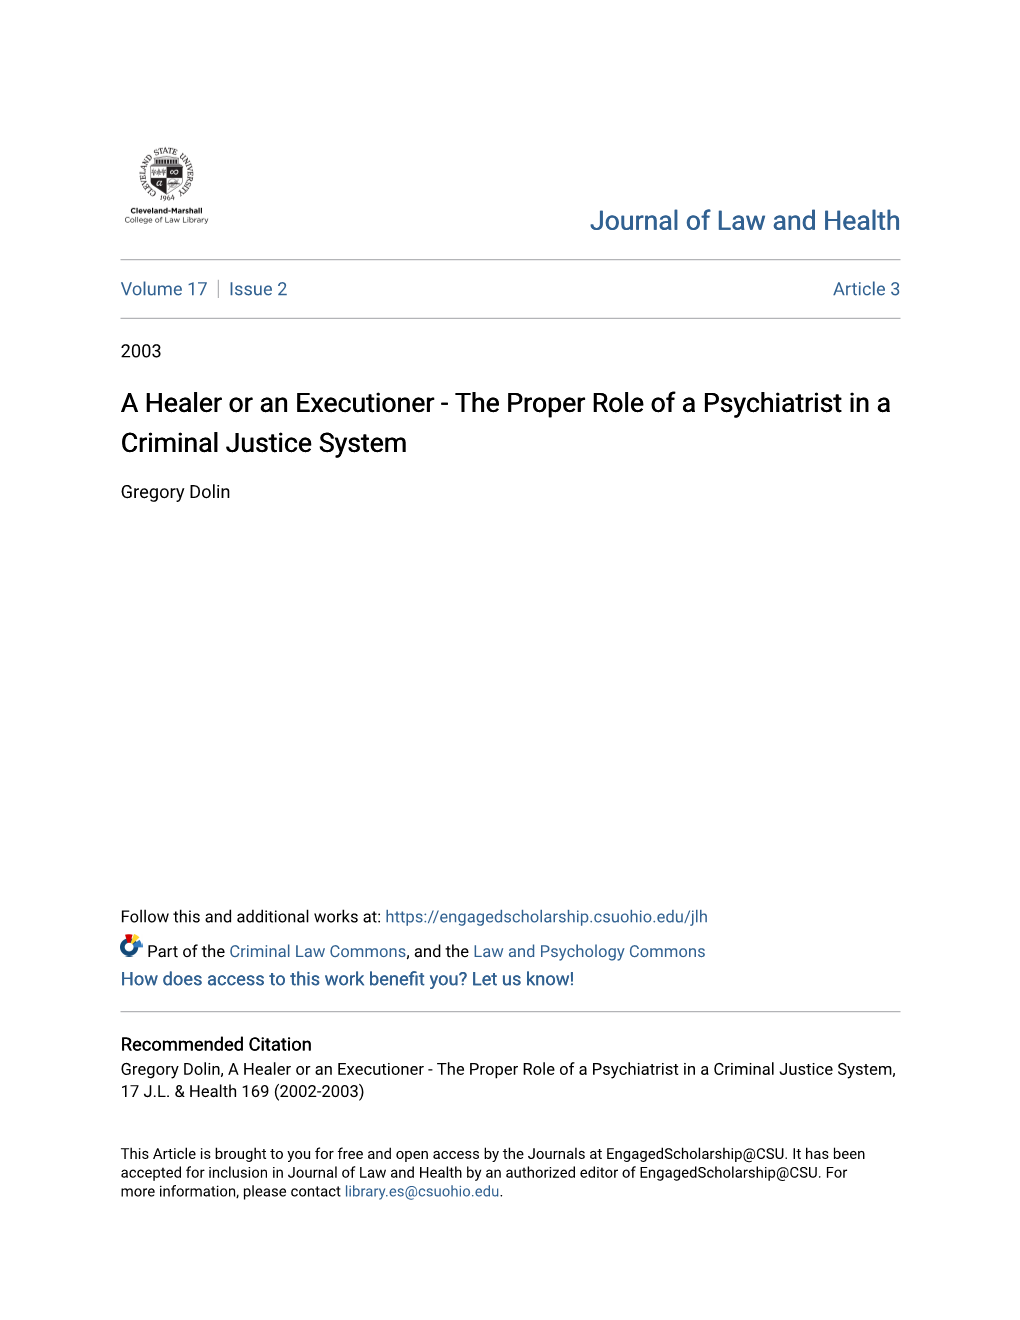 A Healer Or an Executioner - the Proper Role of a Psychiatrist in a Criminal Justice System